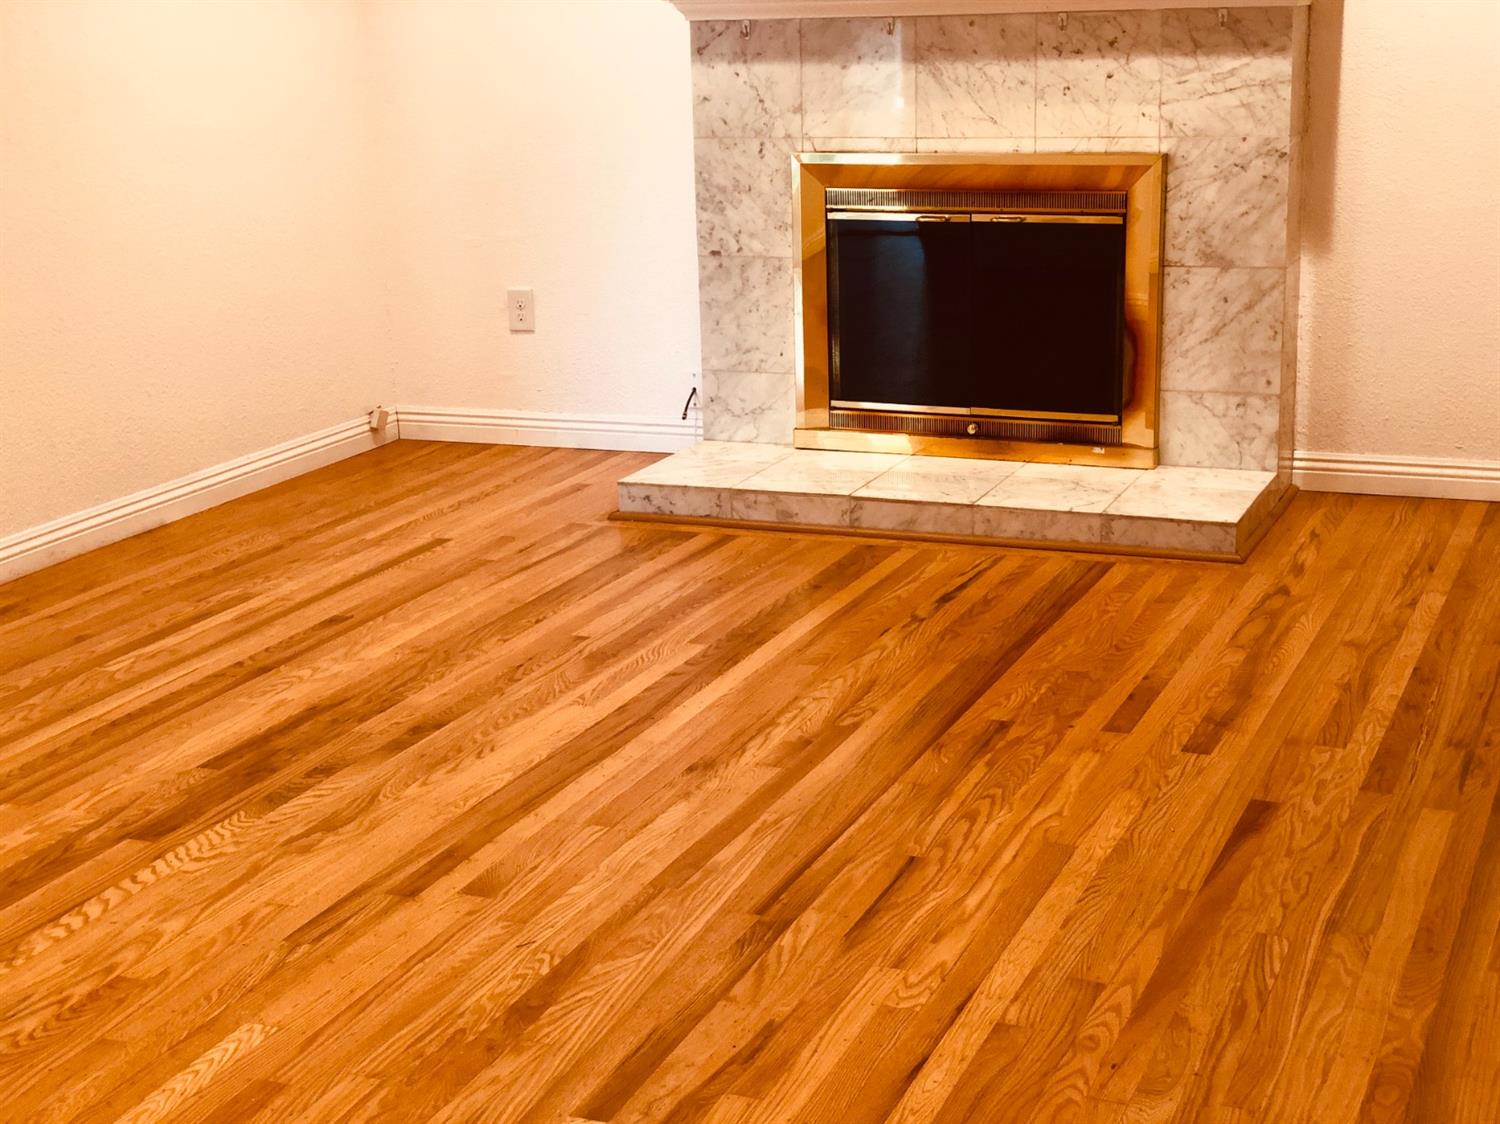 a view of empty room with wooden floor and a fireplace